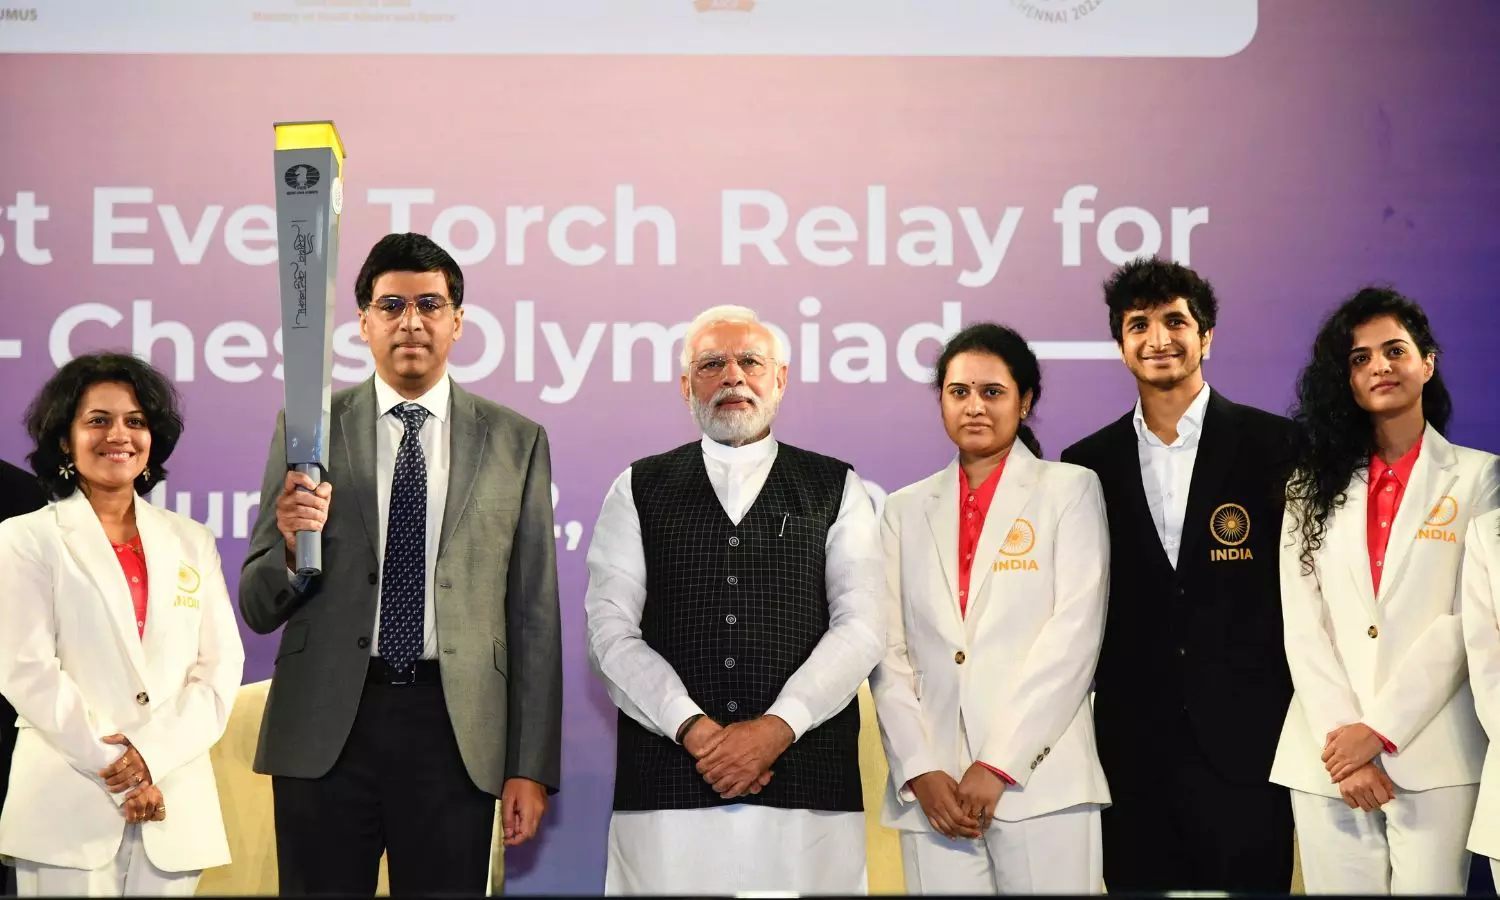 Prime Minister Narendra Modi inaugurated the 44th Chess Olympiad